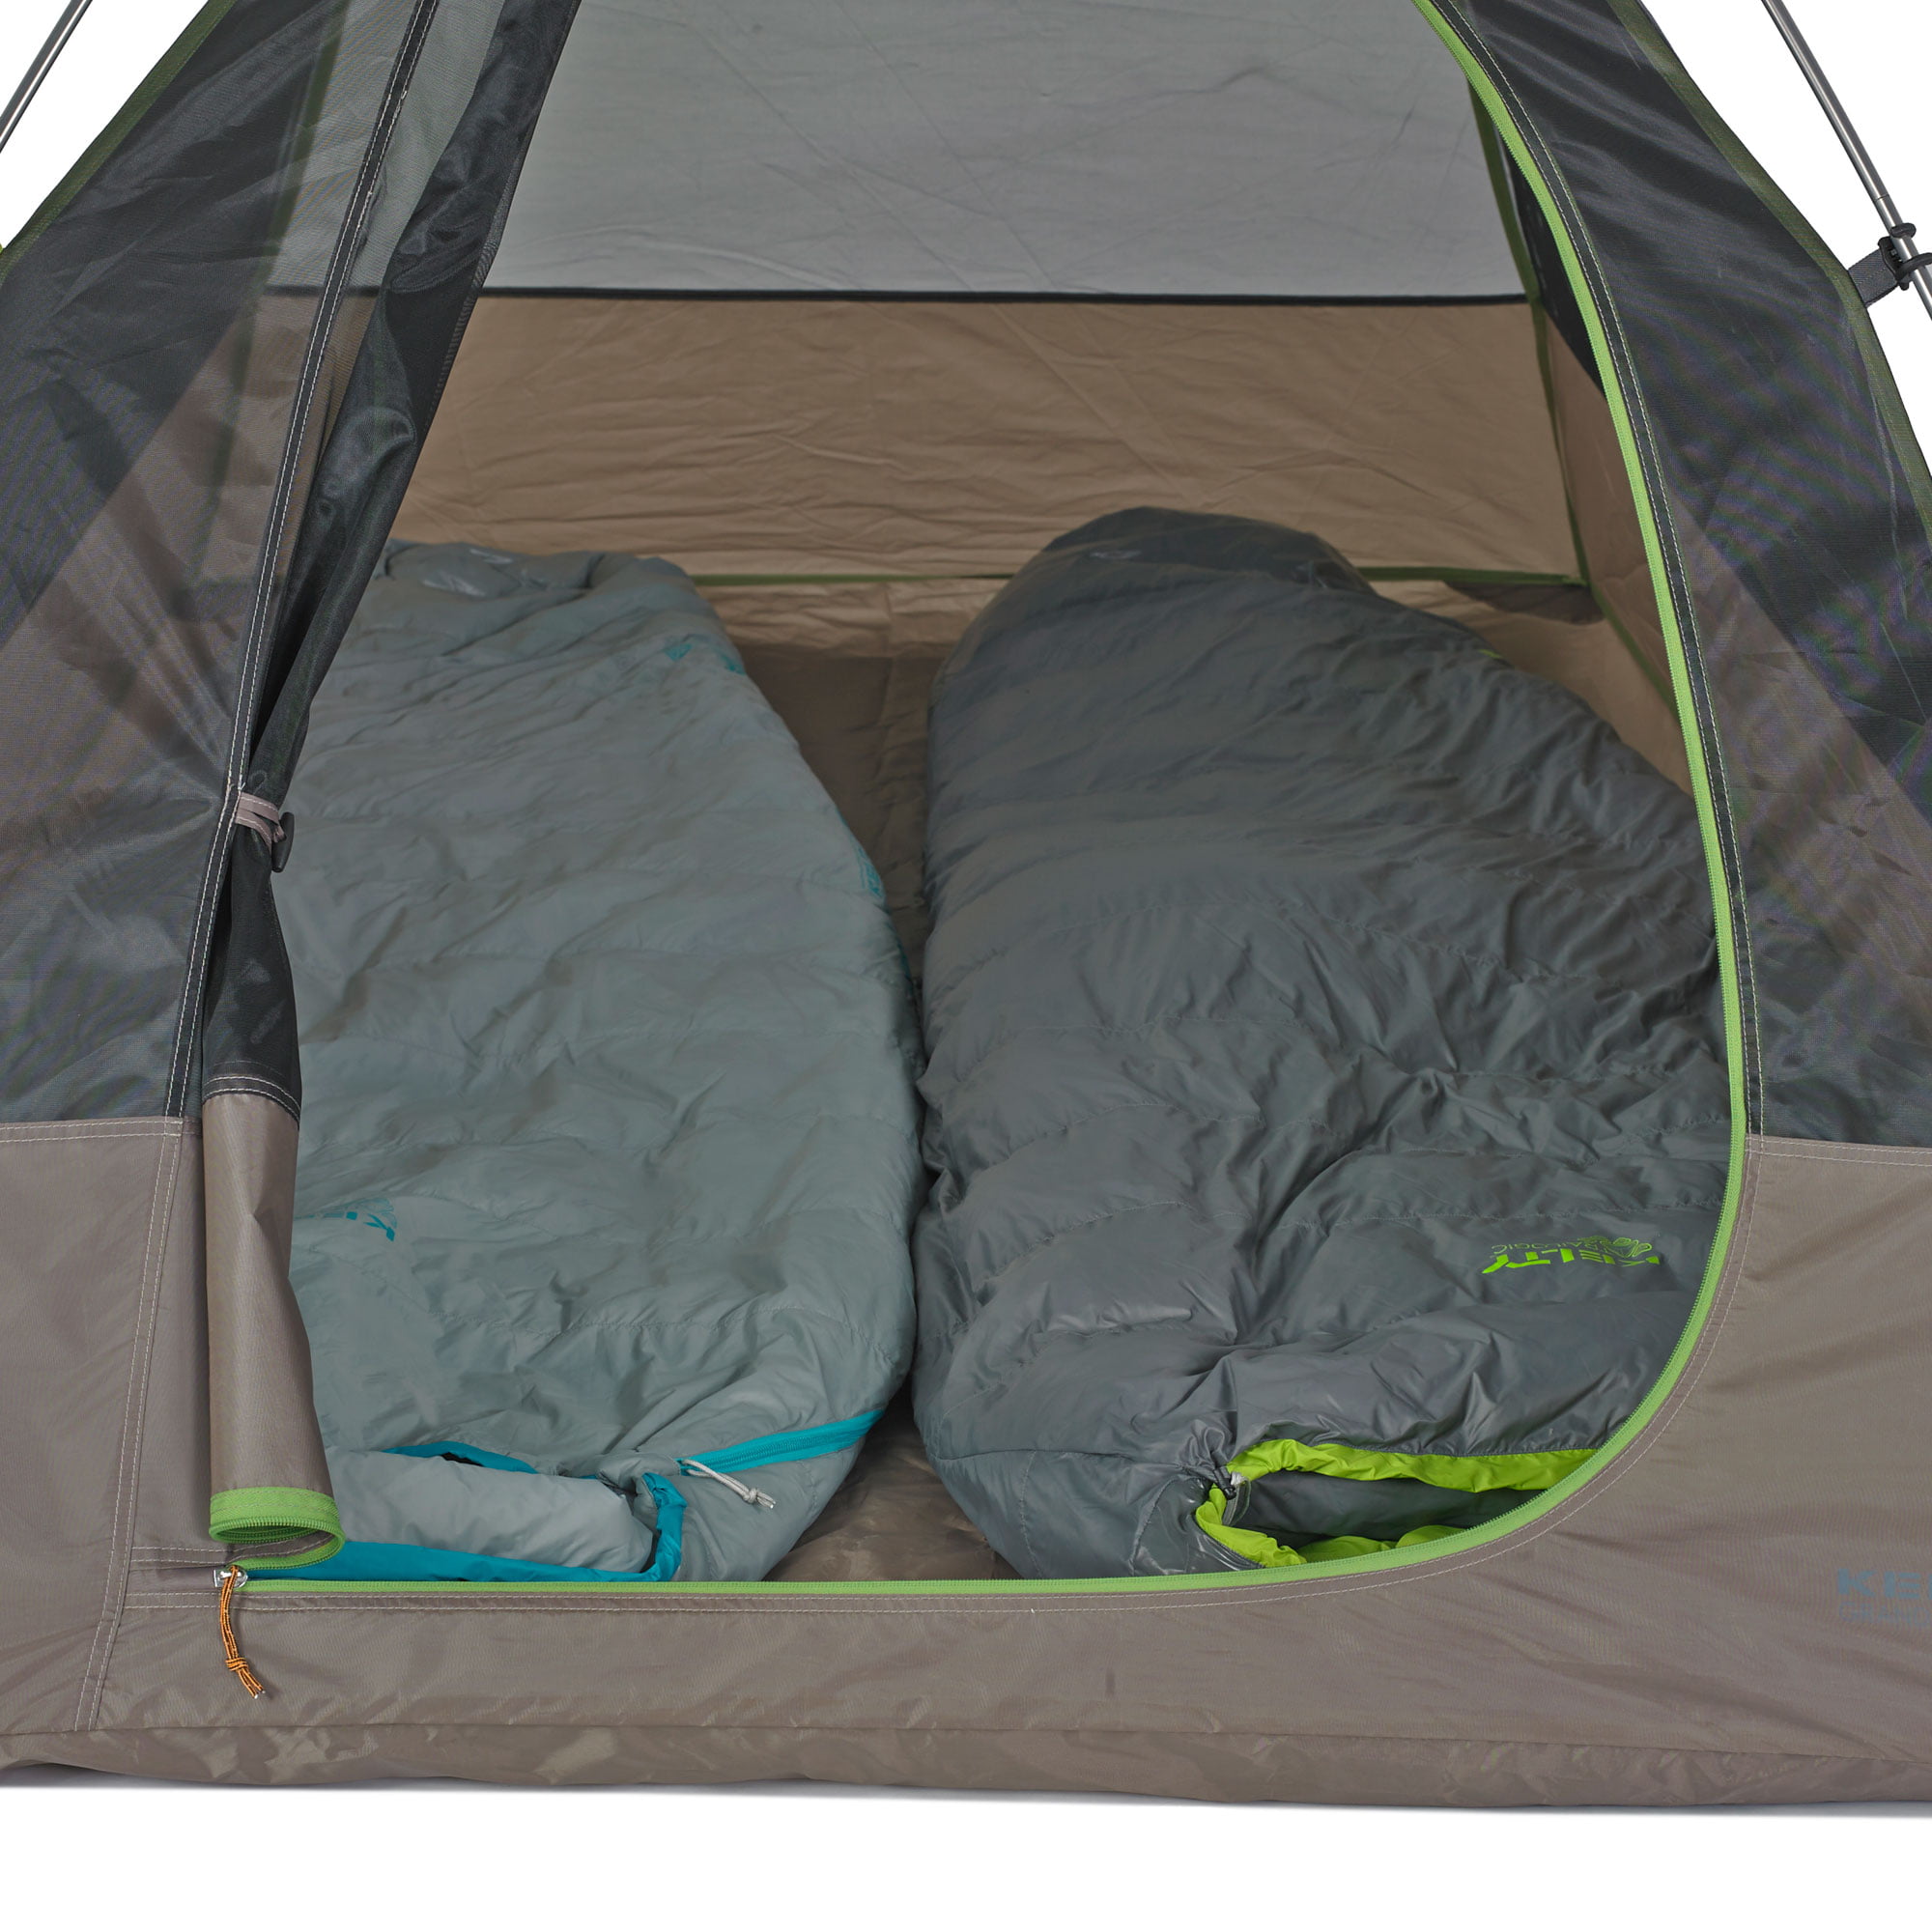 Kelty Grand Mesa Tent â€“ 2 Person Camping Tent